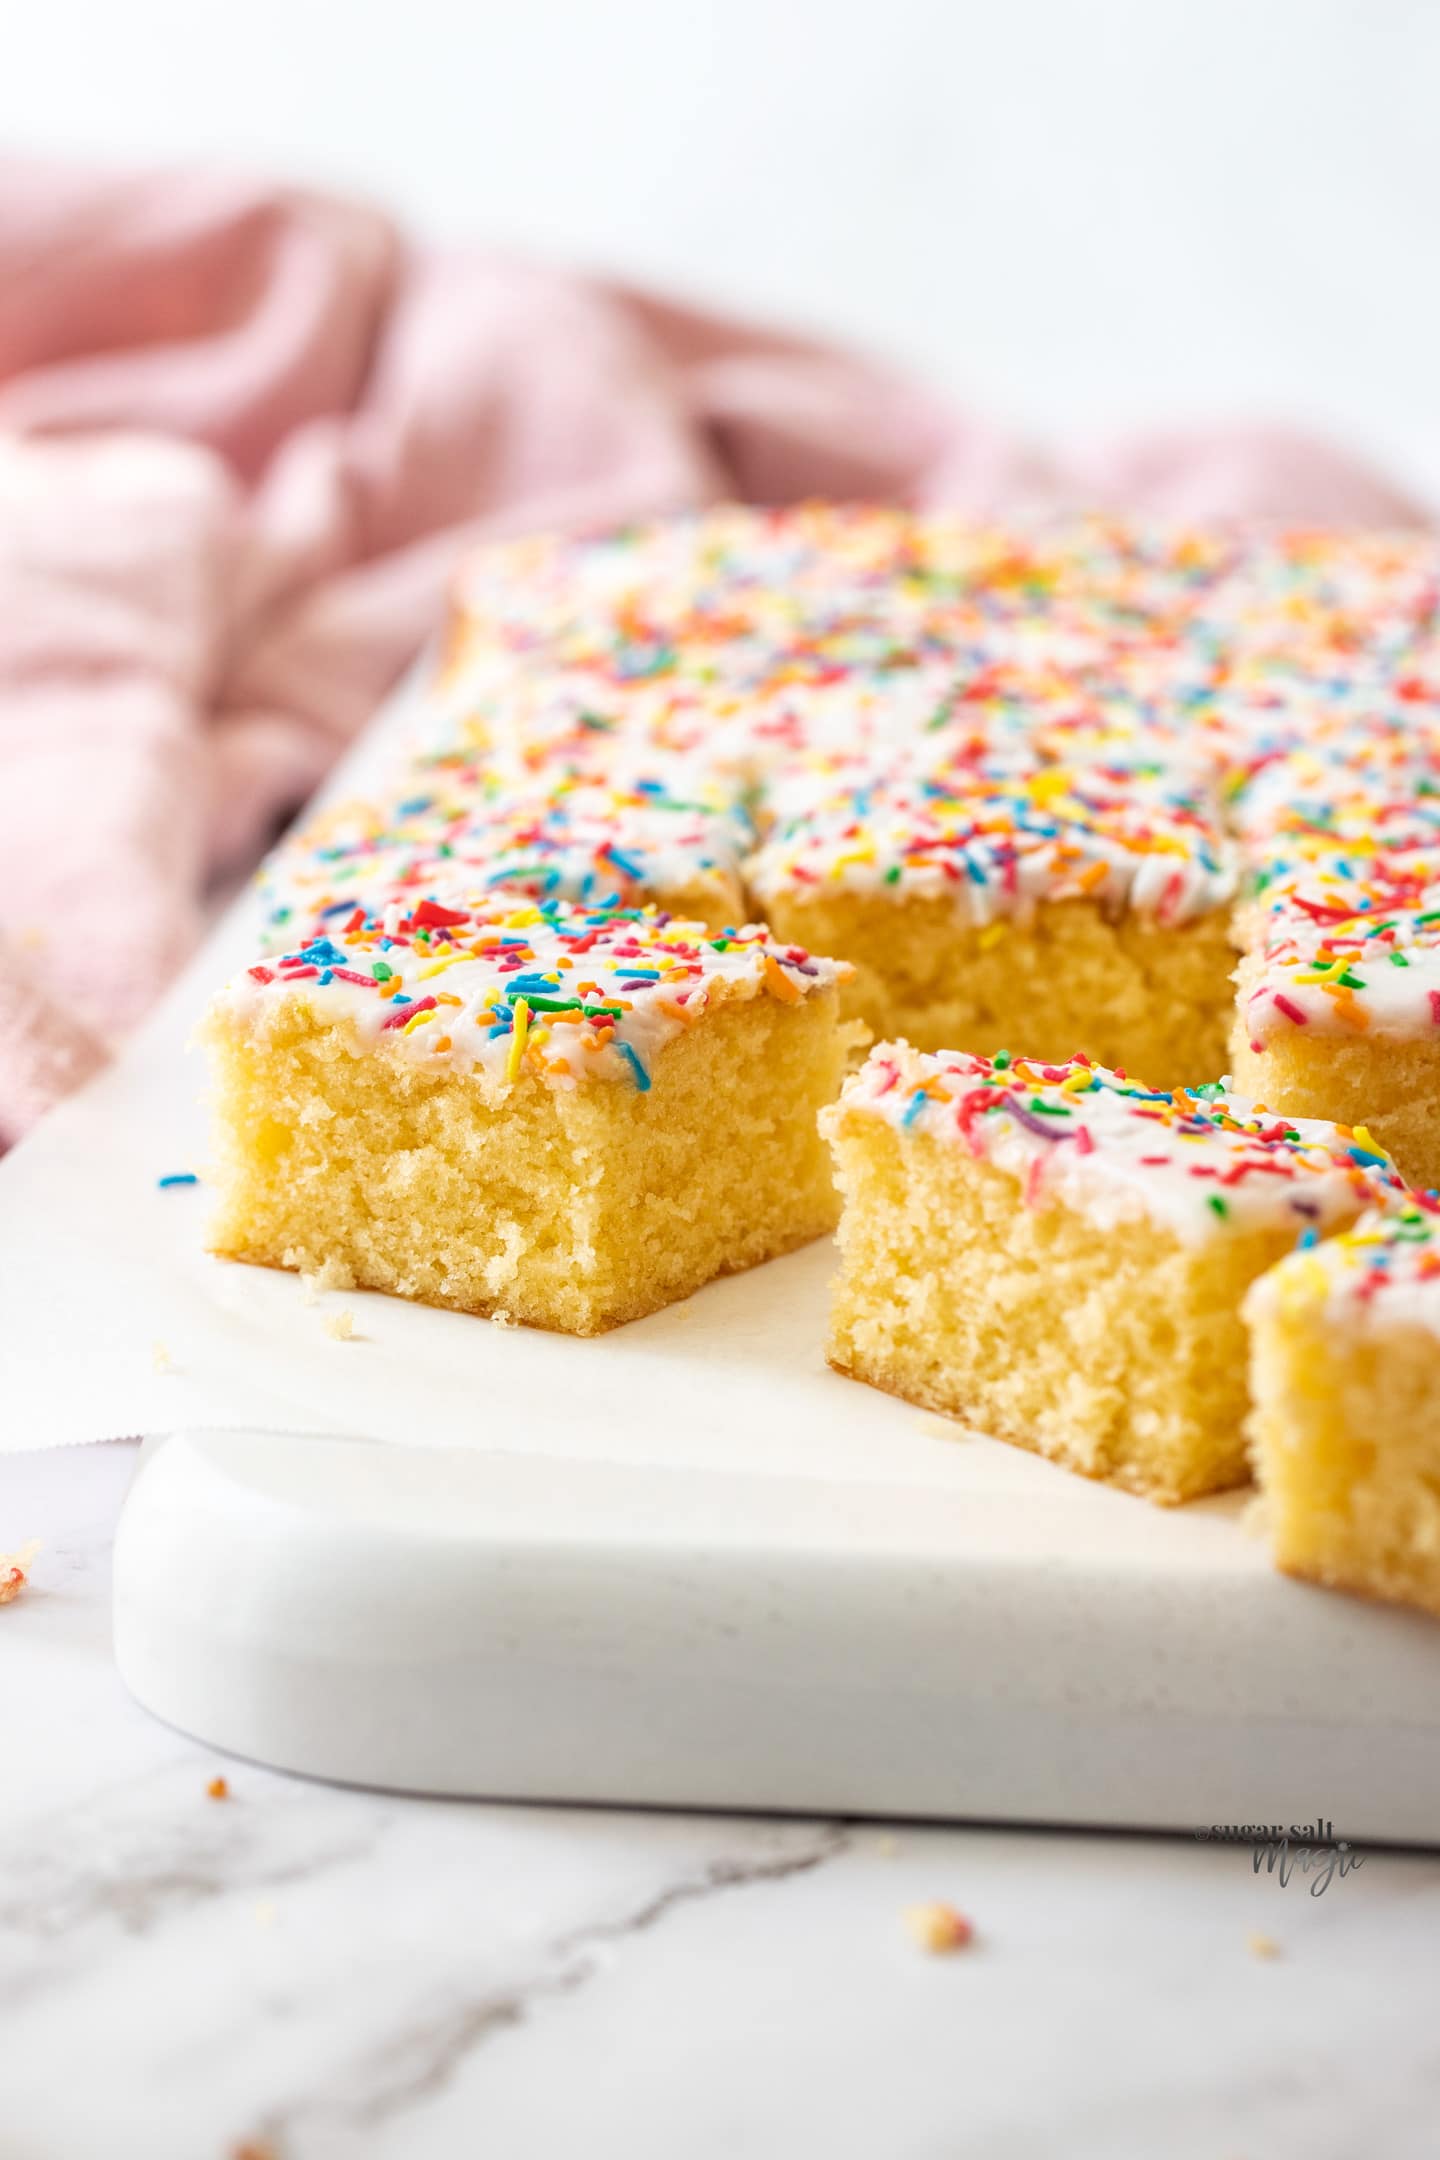 Squares of sponge cake topped with icing and sprinkles.